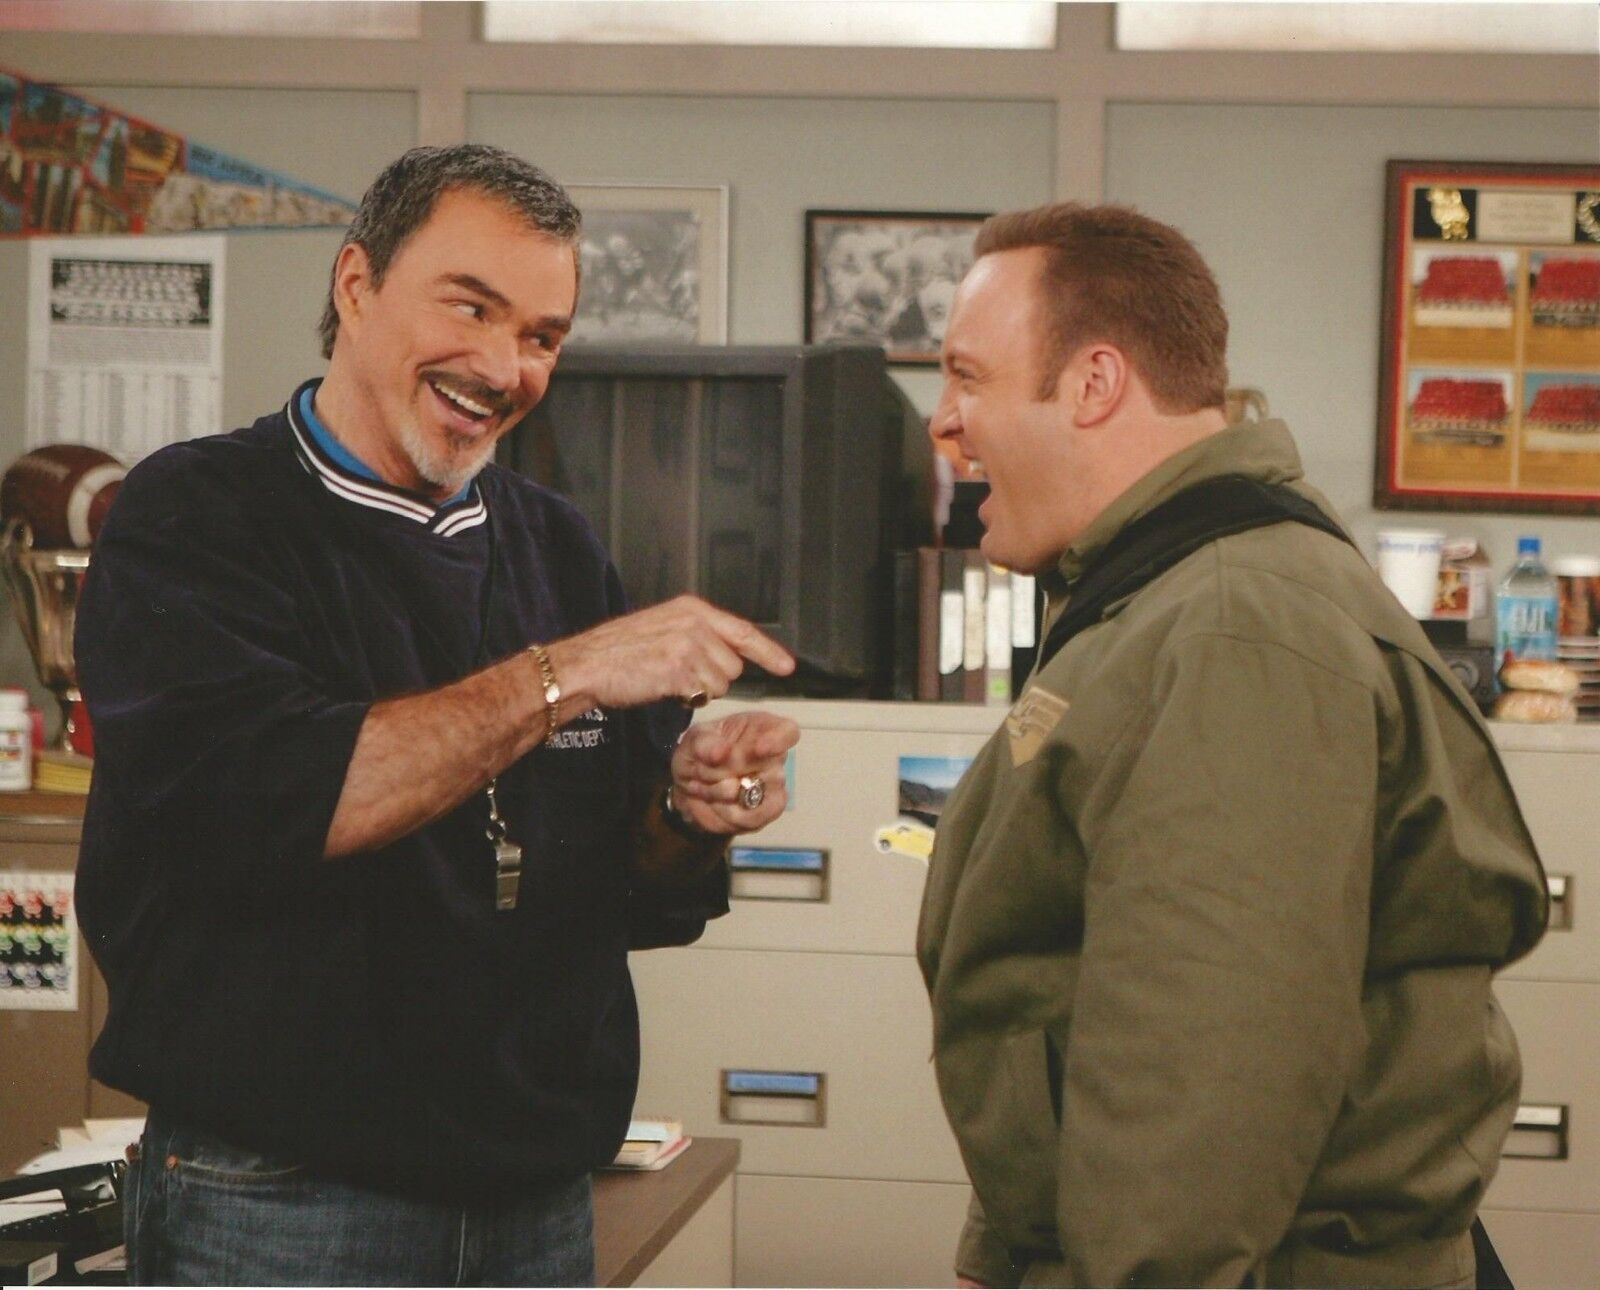 Burt Reynolds & Kevin James The King of Queens 8x10 Photo Poster painting Picture Football Coach